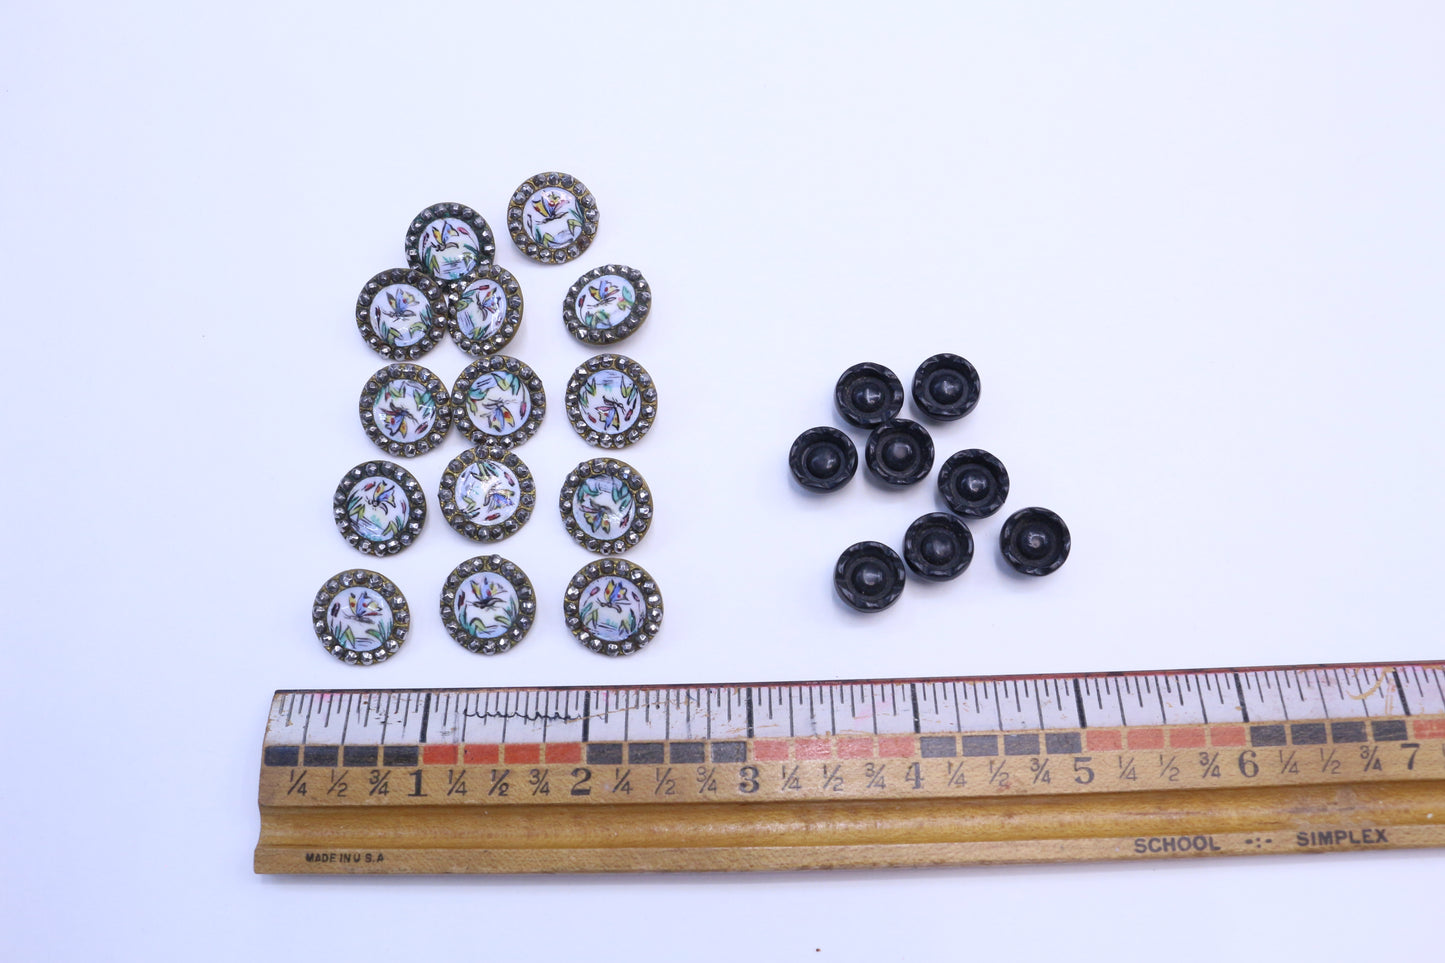 Vintage Butterfly Buttons or Black Cup Flower Buttons